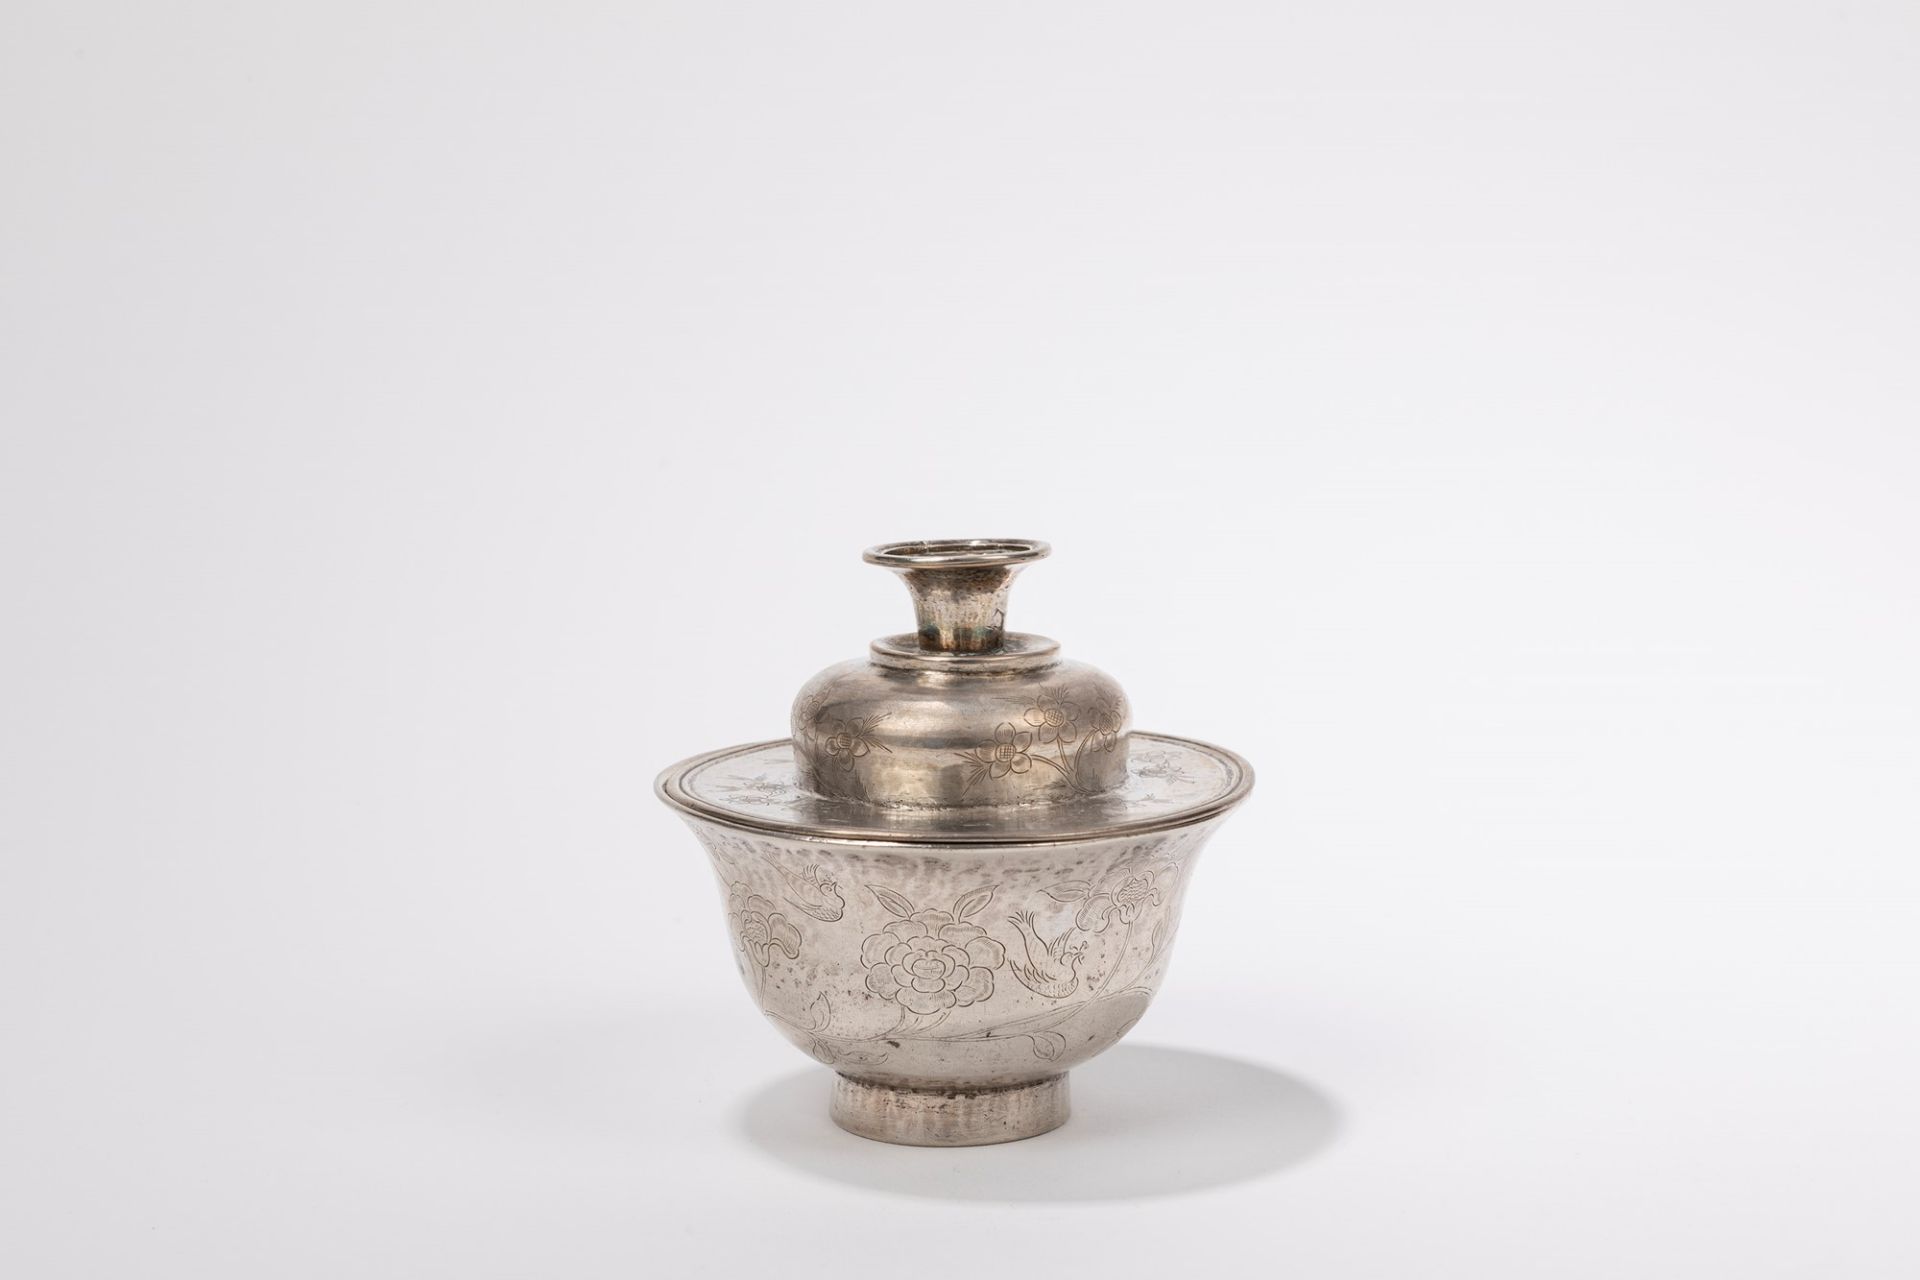 A SILVER CUP AND COVER, China, early 20th century